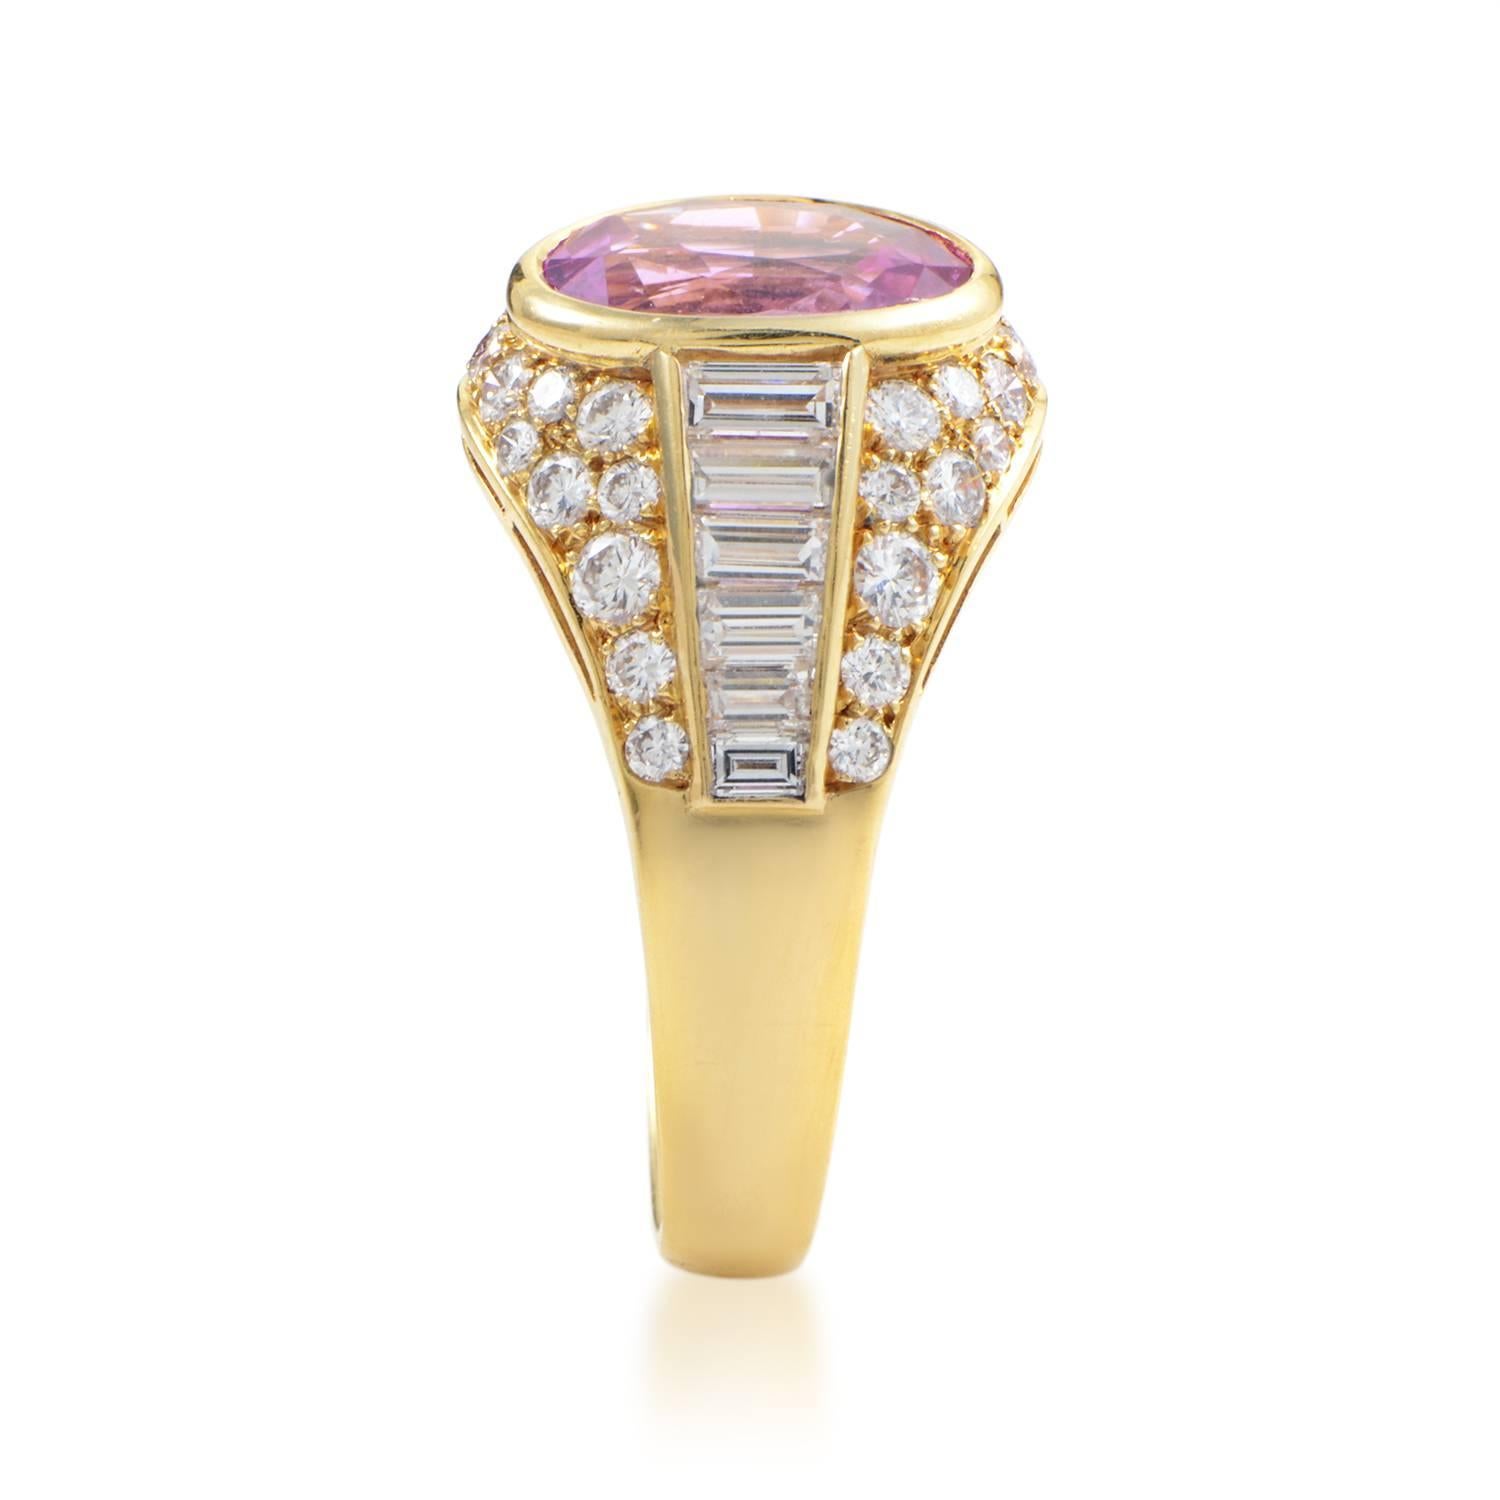 An item of sublime aesthetic appeal and refined prestigious quality, this majestic ring from Bulgari boasts diversely cut diamonds totaling approximately 2.00 carats set upon 18K yellow gold to complement the fantastic pink sapphire weighing 4.50